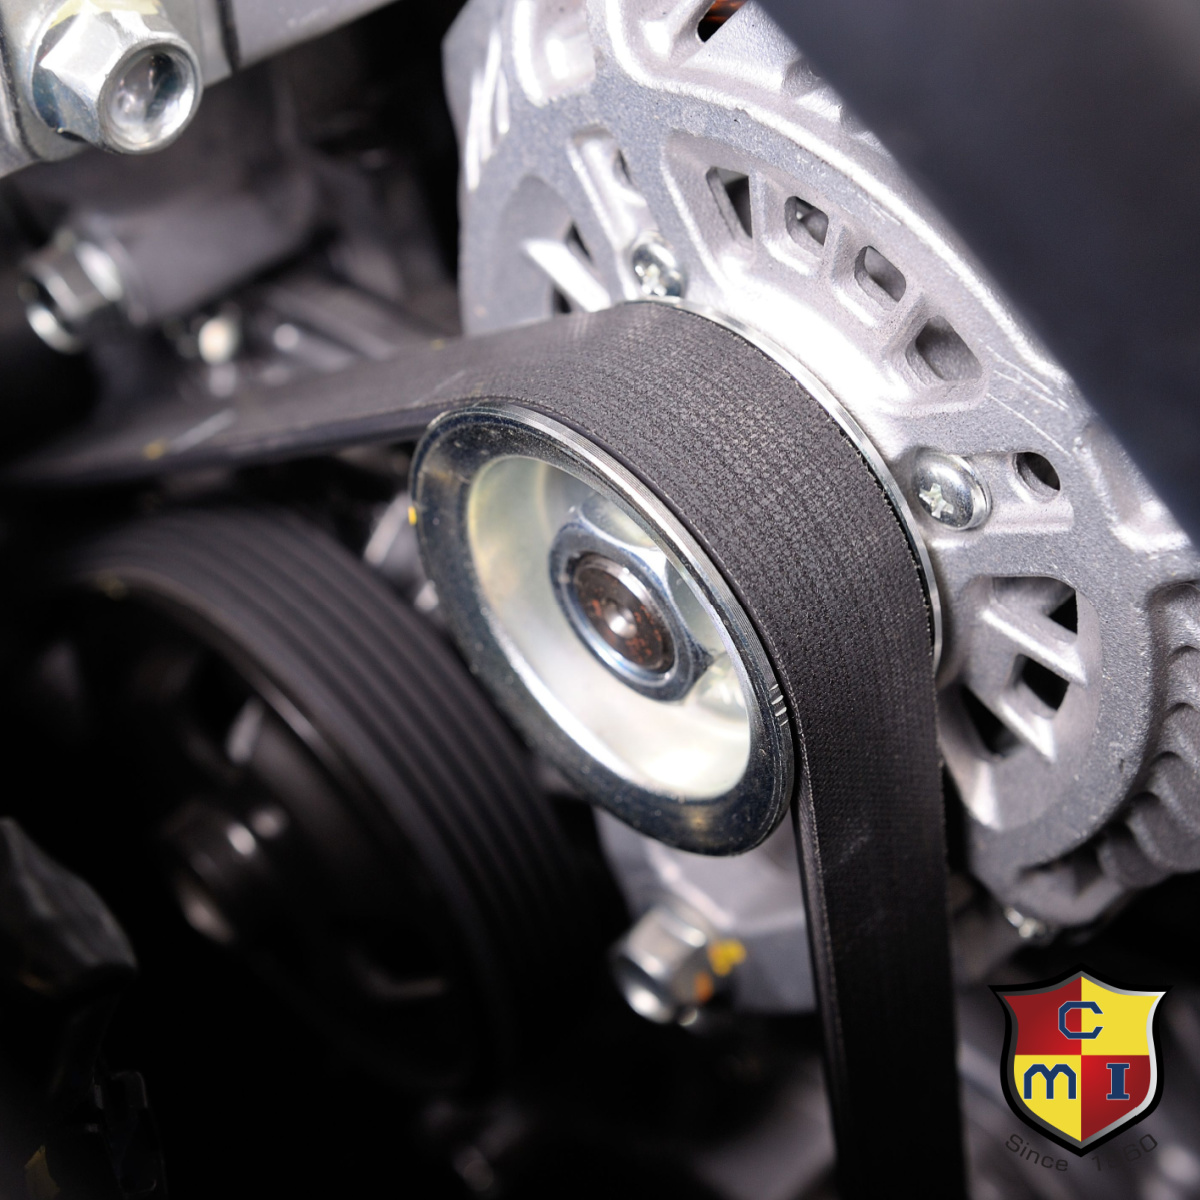 Don't Let Your Timing Chain and Belt Slip - Call Conaway Motors